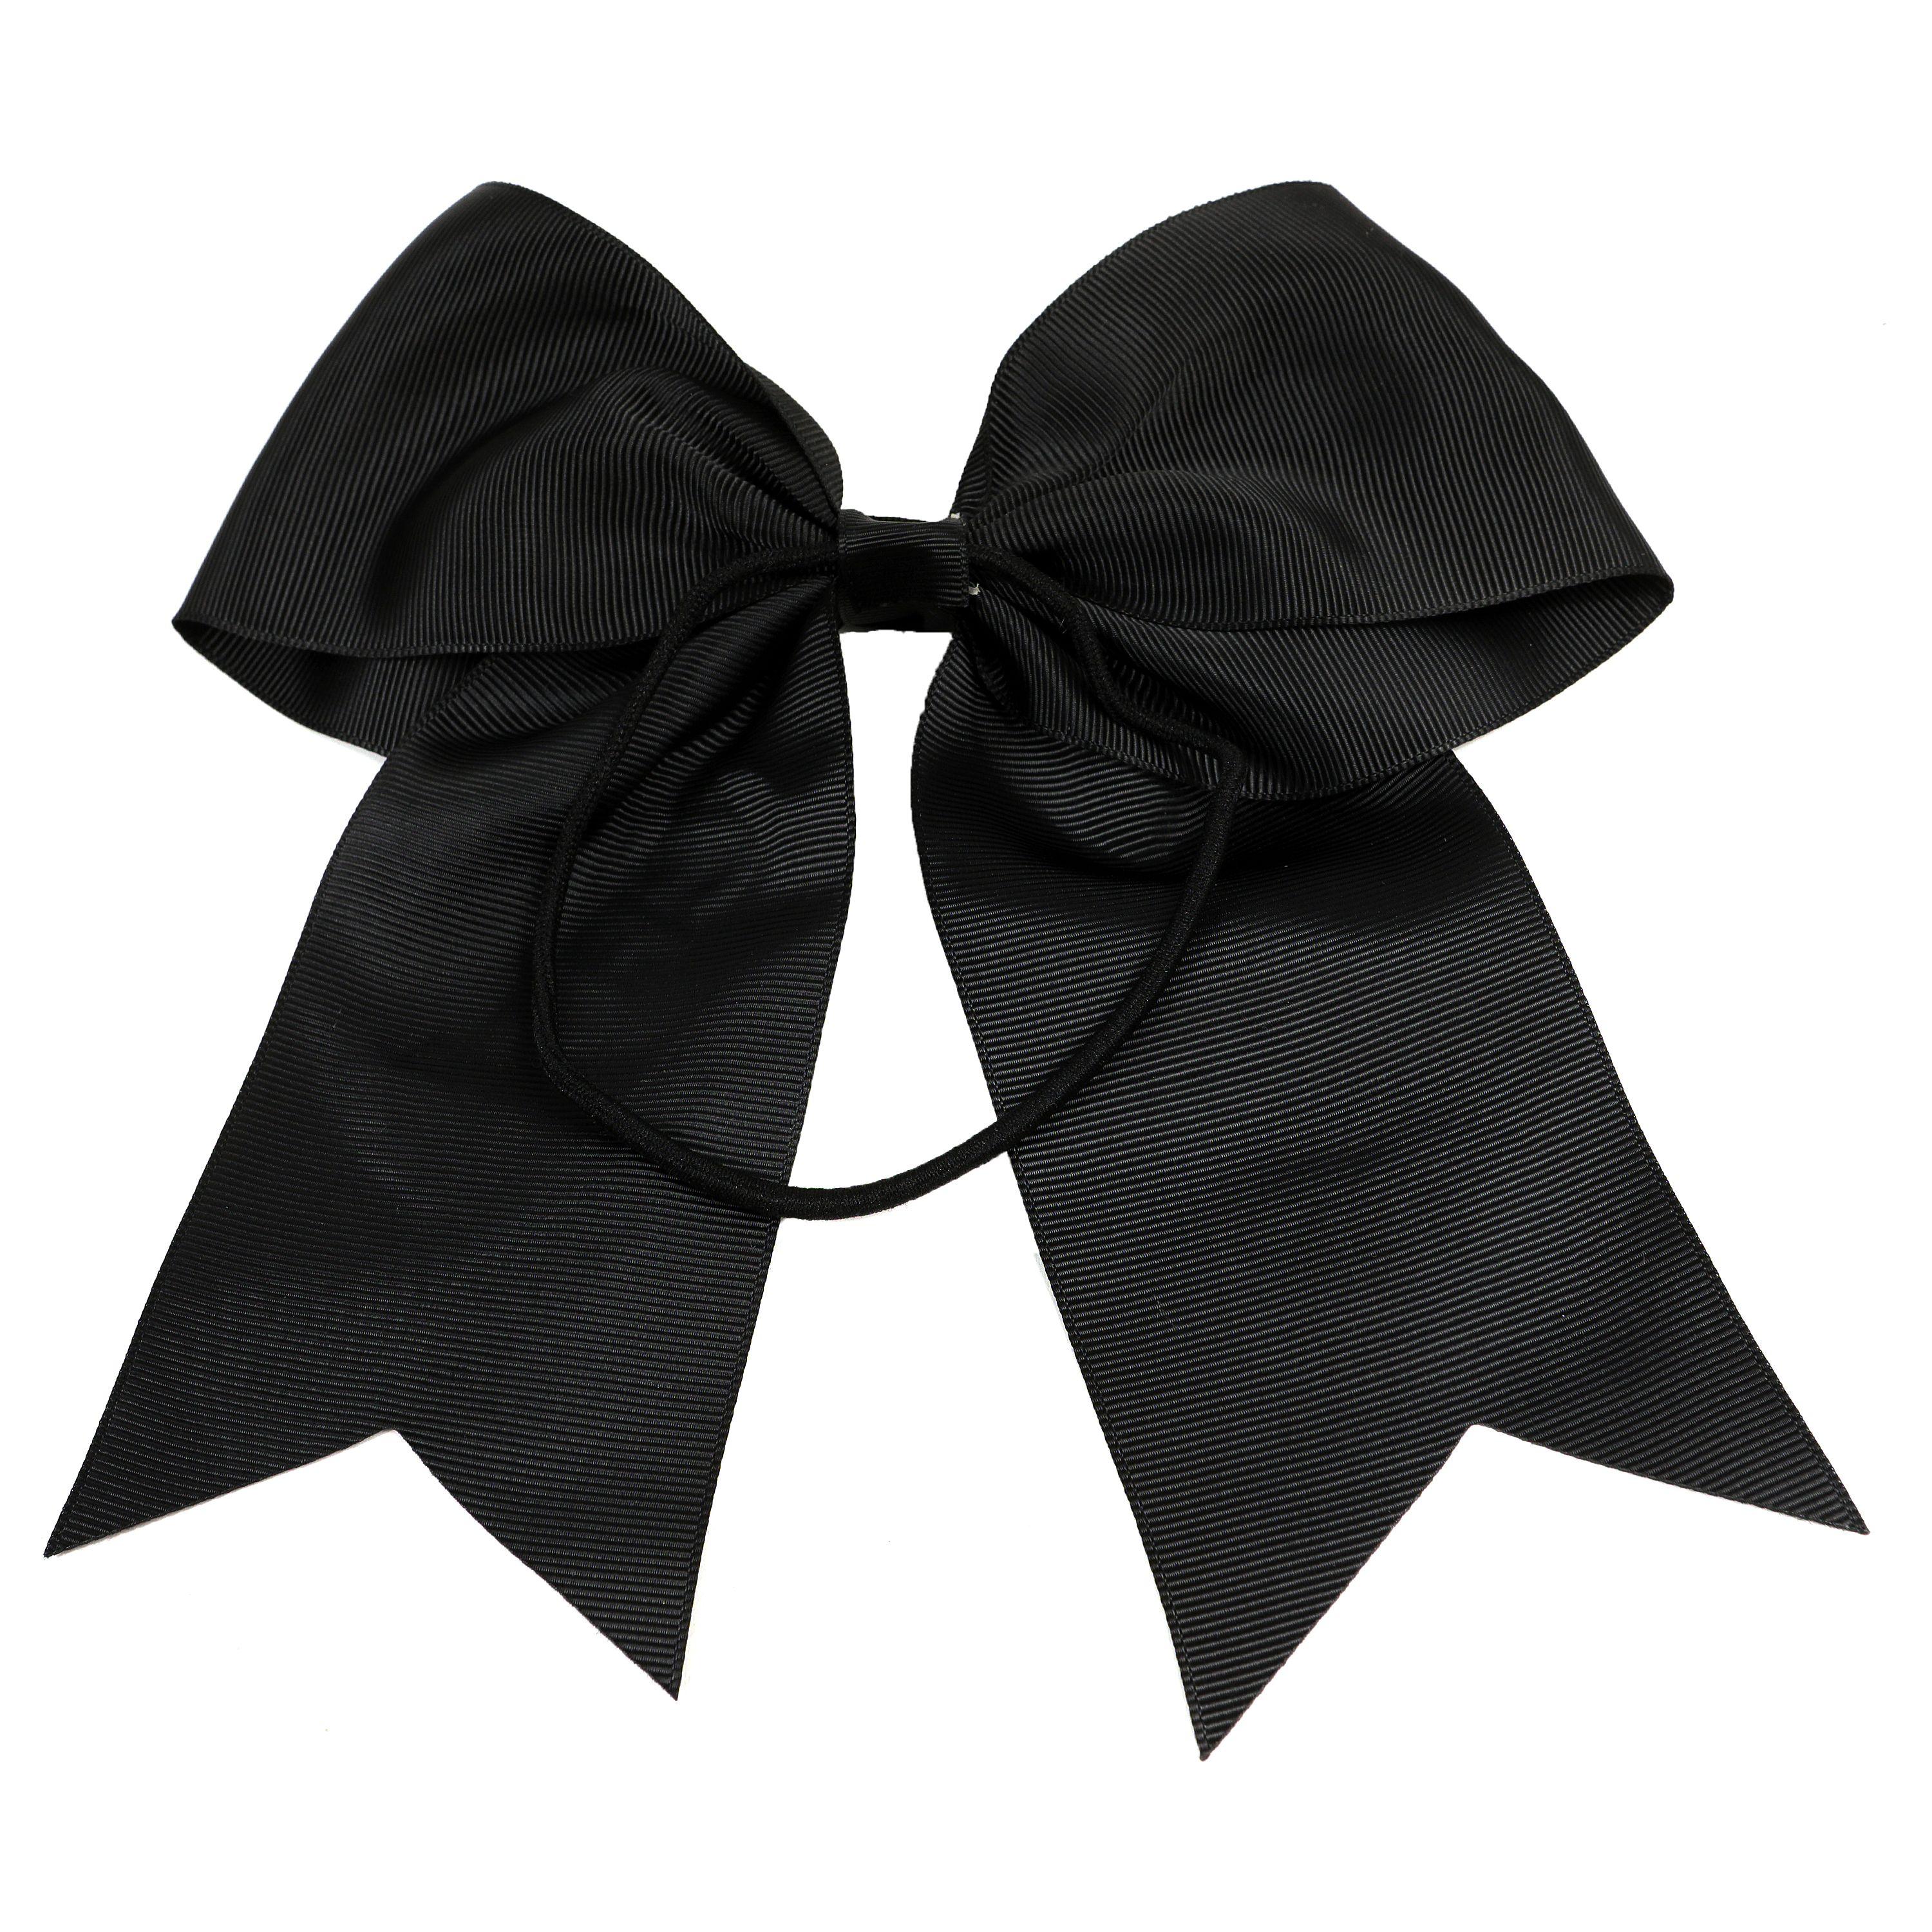 Chanel Black Satin Cheer Bow Hair Tie In New Condition For Sale In Palm Beach, FL